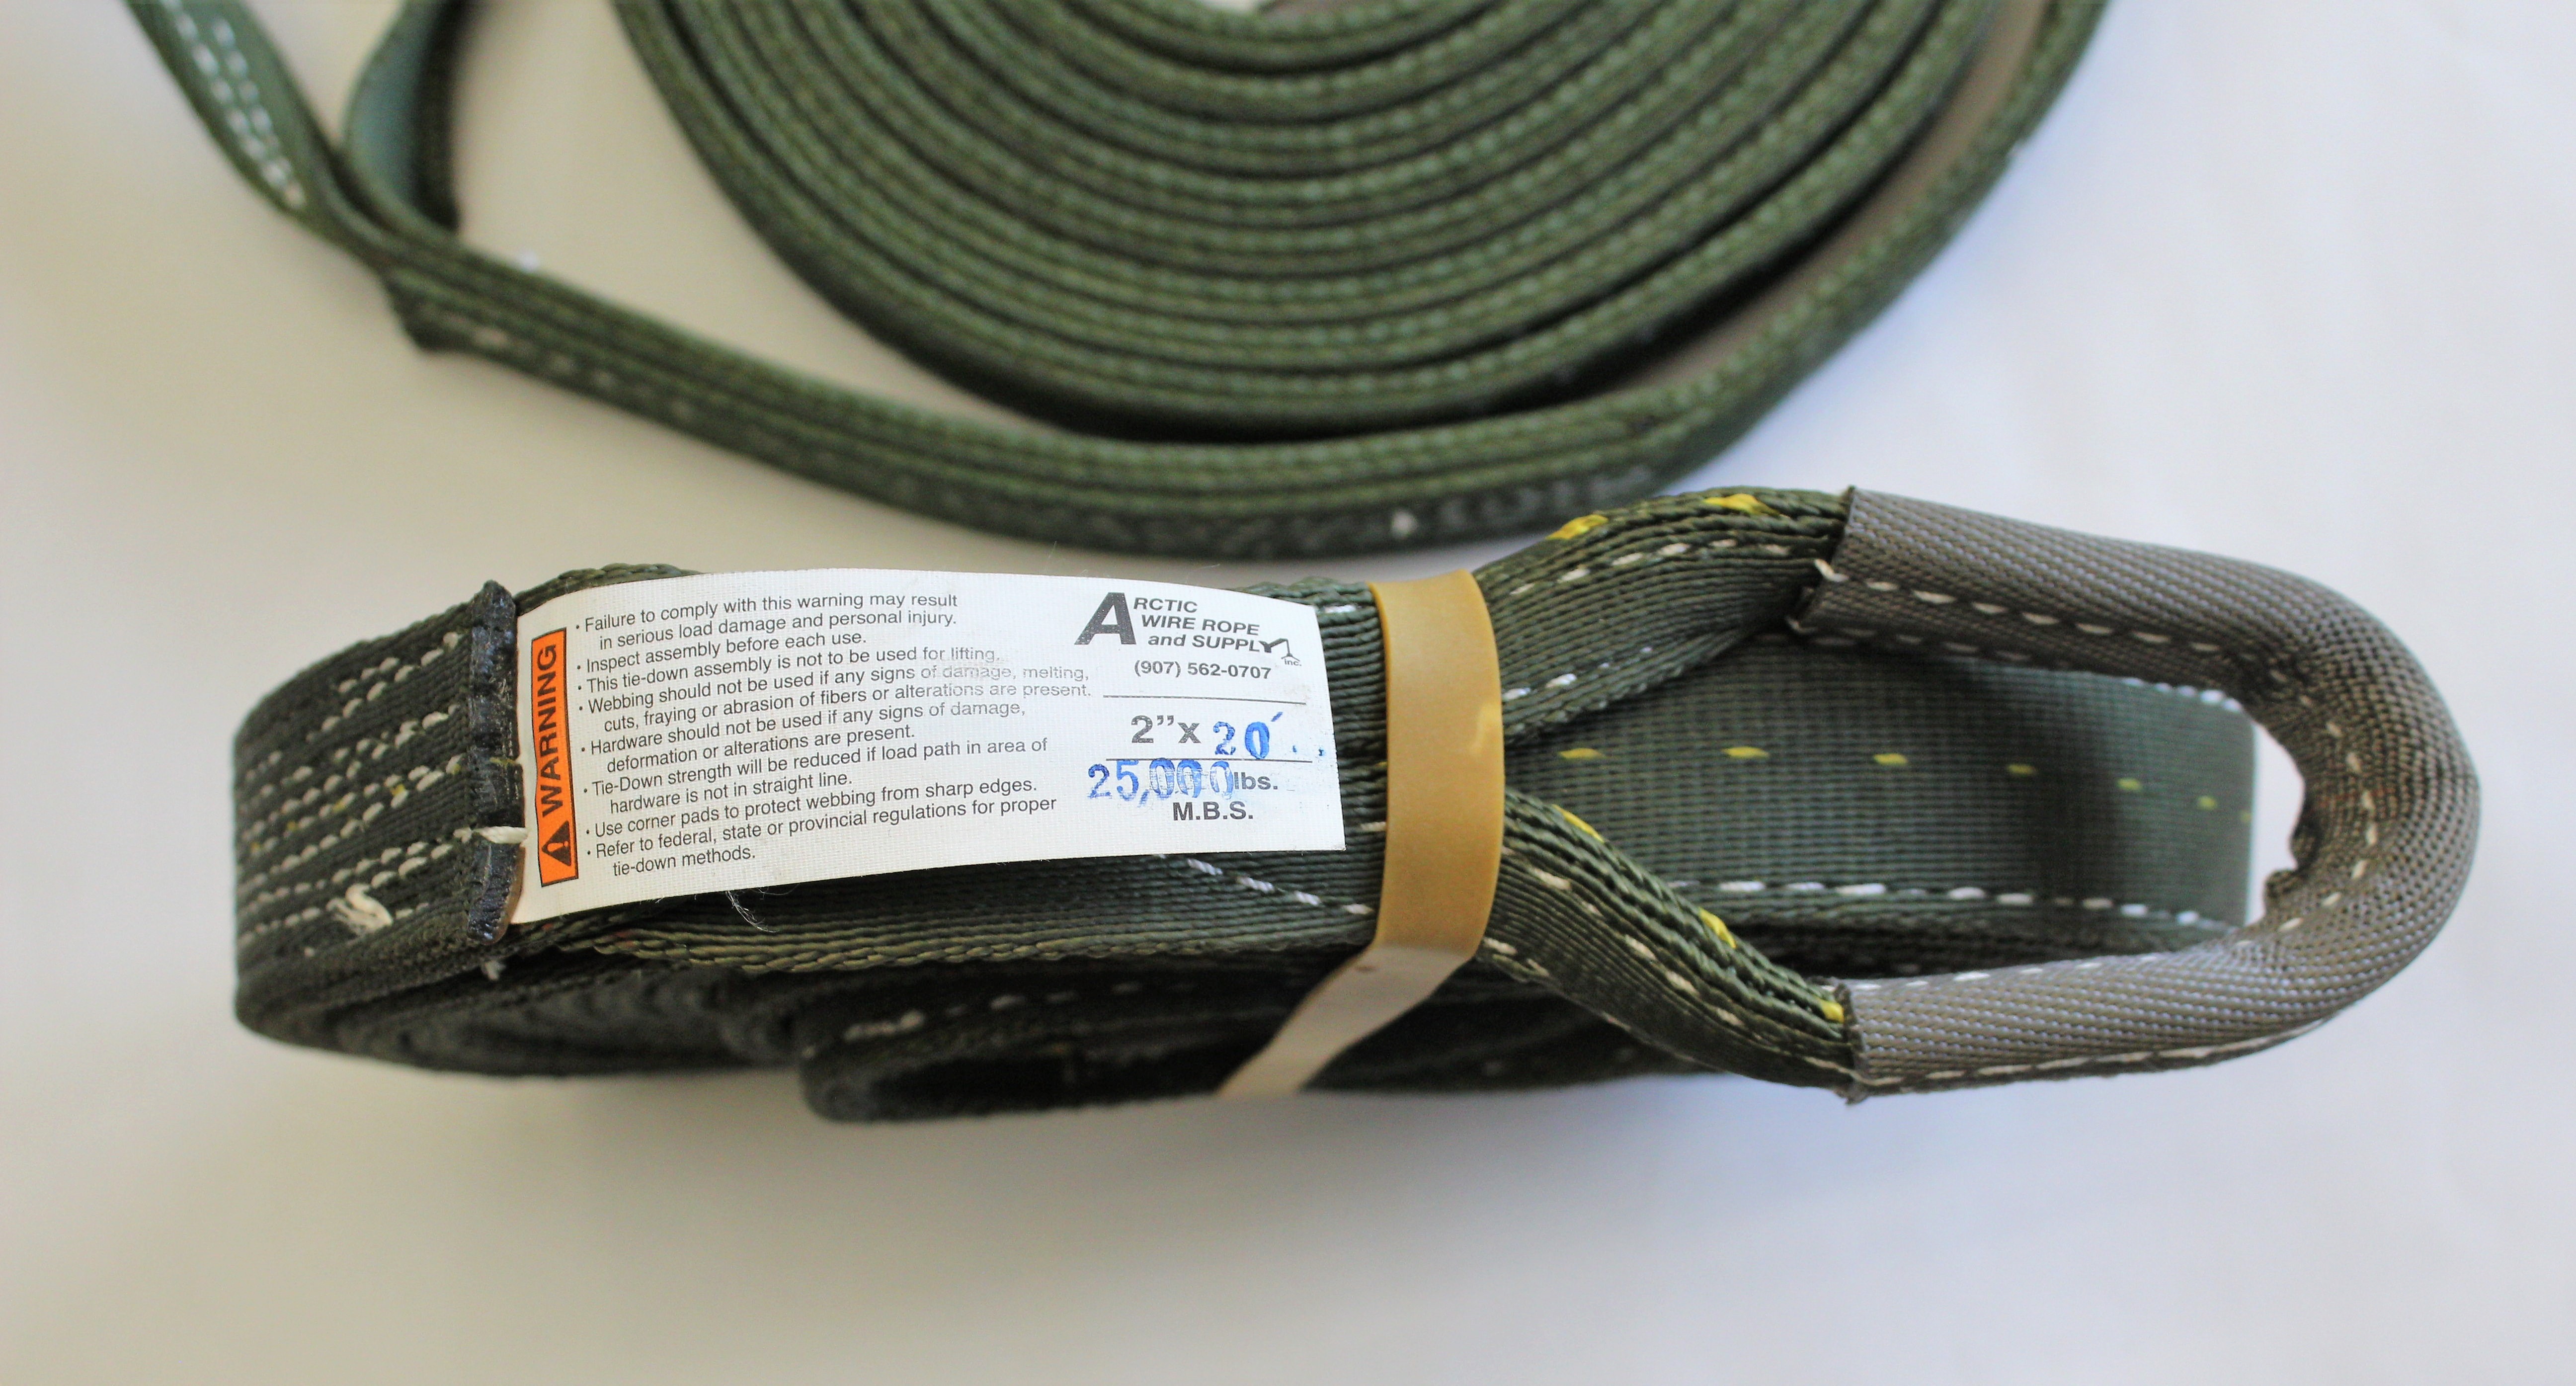 X 1 3/4" WIDE MILITARY TOW STRAP/ SLING LIFT HITCHES OFF GROUND BULK APPX.3 FT 